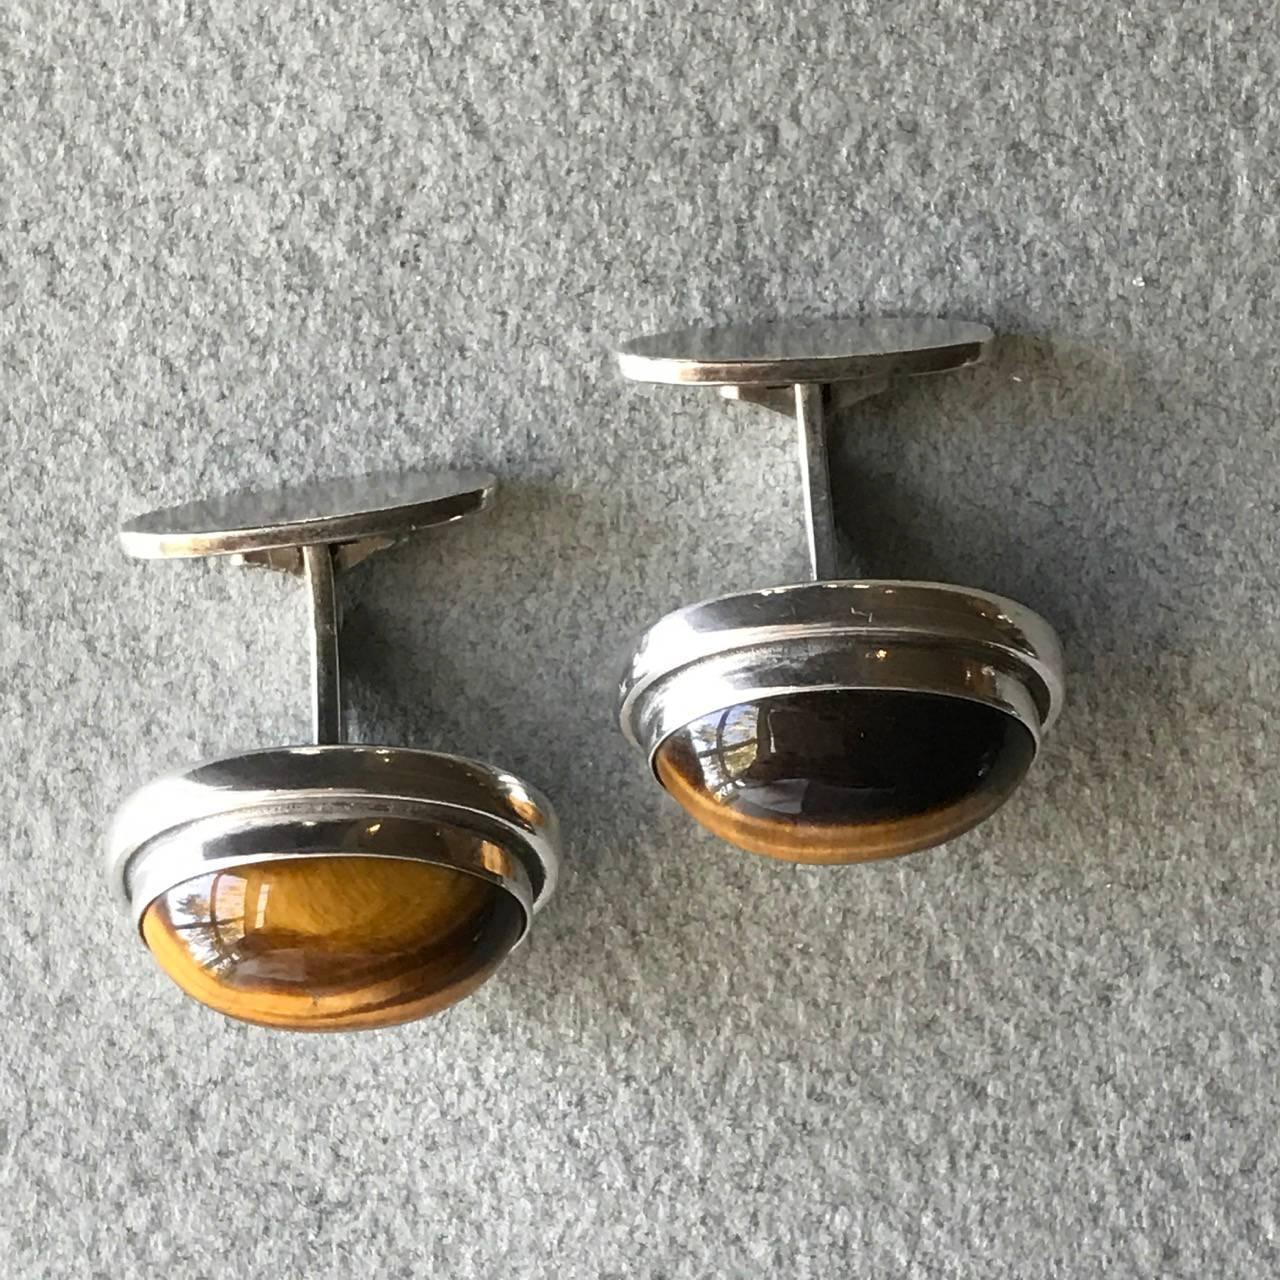 Georg Jensen Sterling Silver and Tiger Eye Cufflinks, No. 44A By Harald Nielsen

An uncommon pair of oval sterling silver cufflinks set with Tiger Eye cabochon. The pair comes in their original Jensen box, circa 1951.